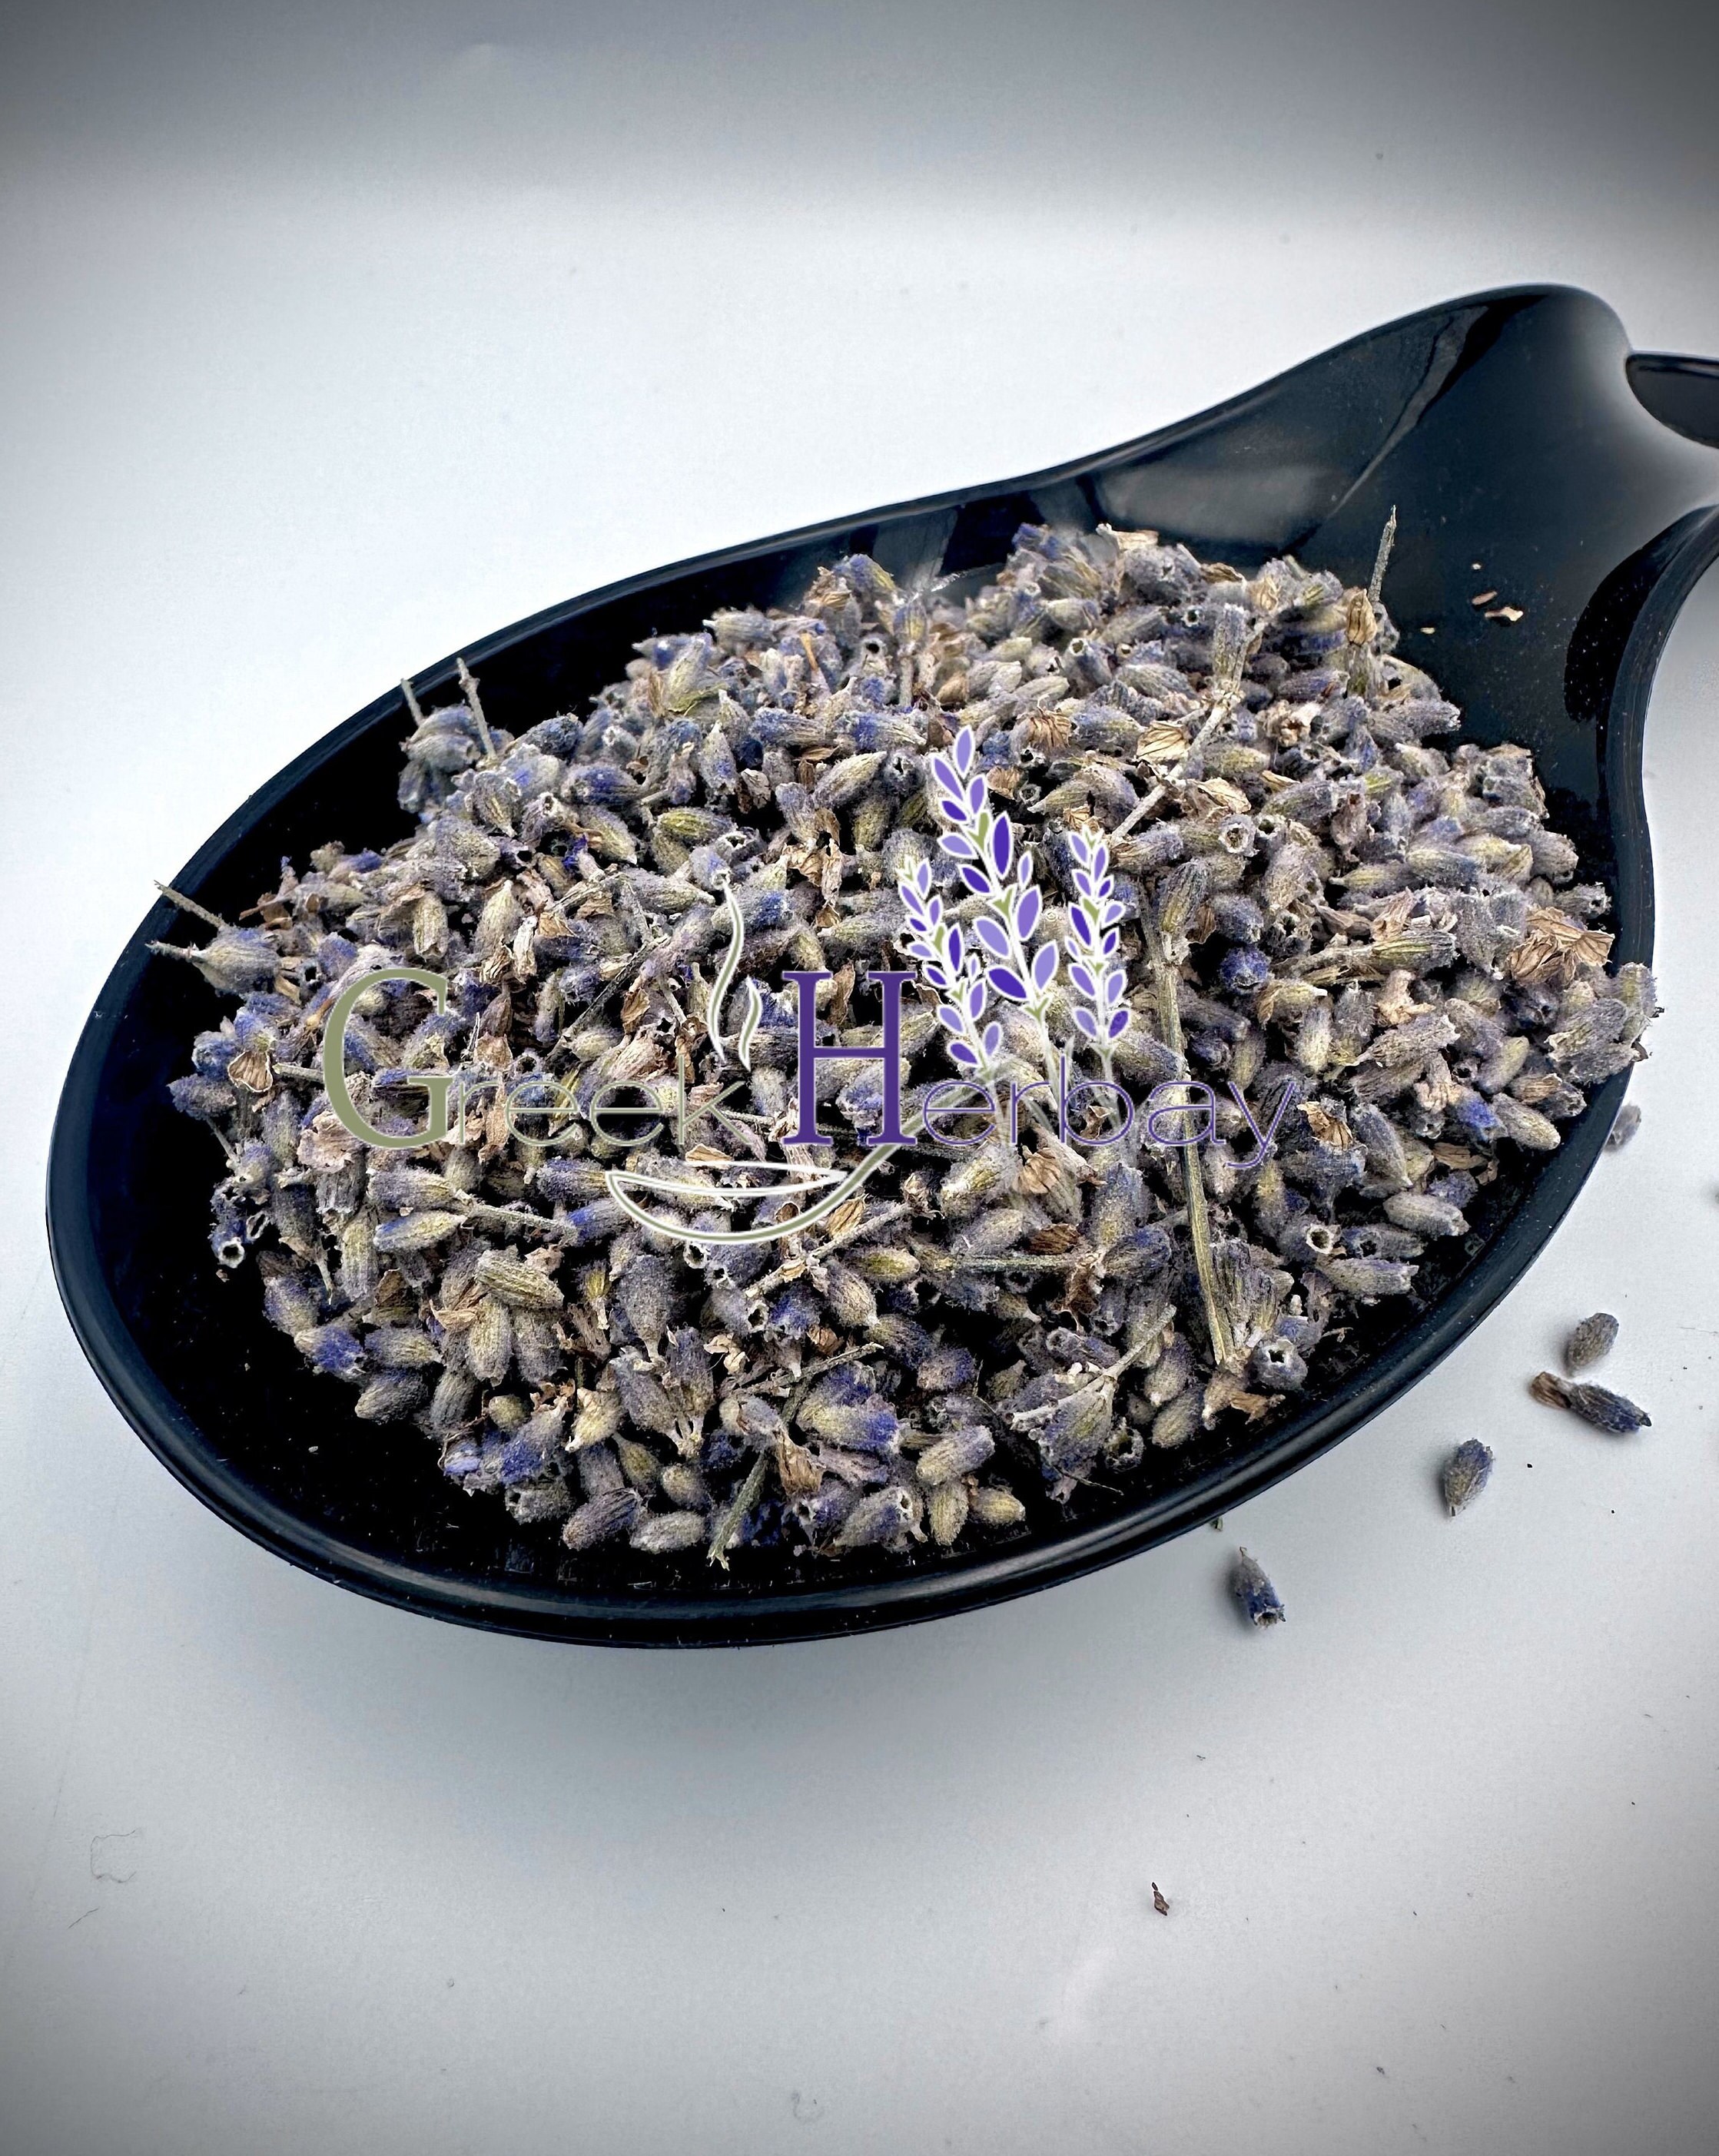 Dried Lavender Buds - Illinois